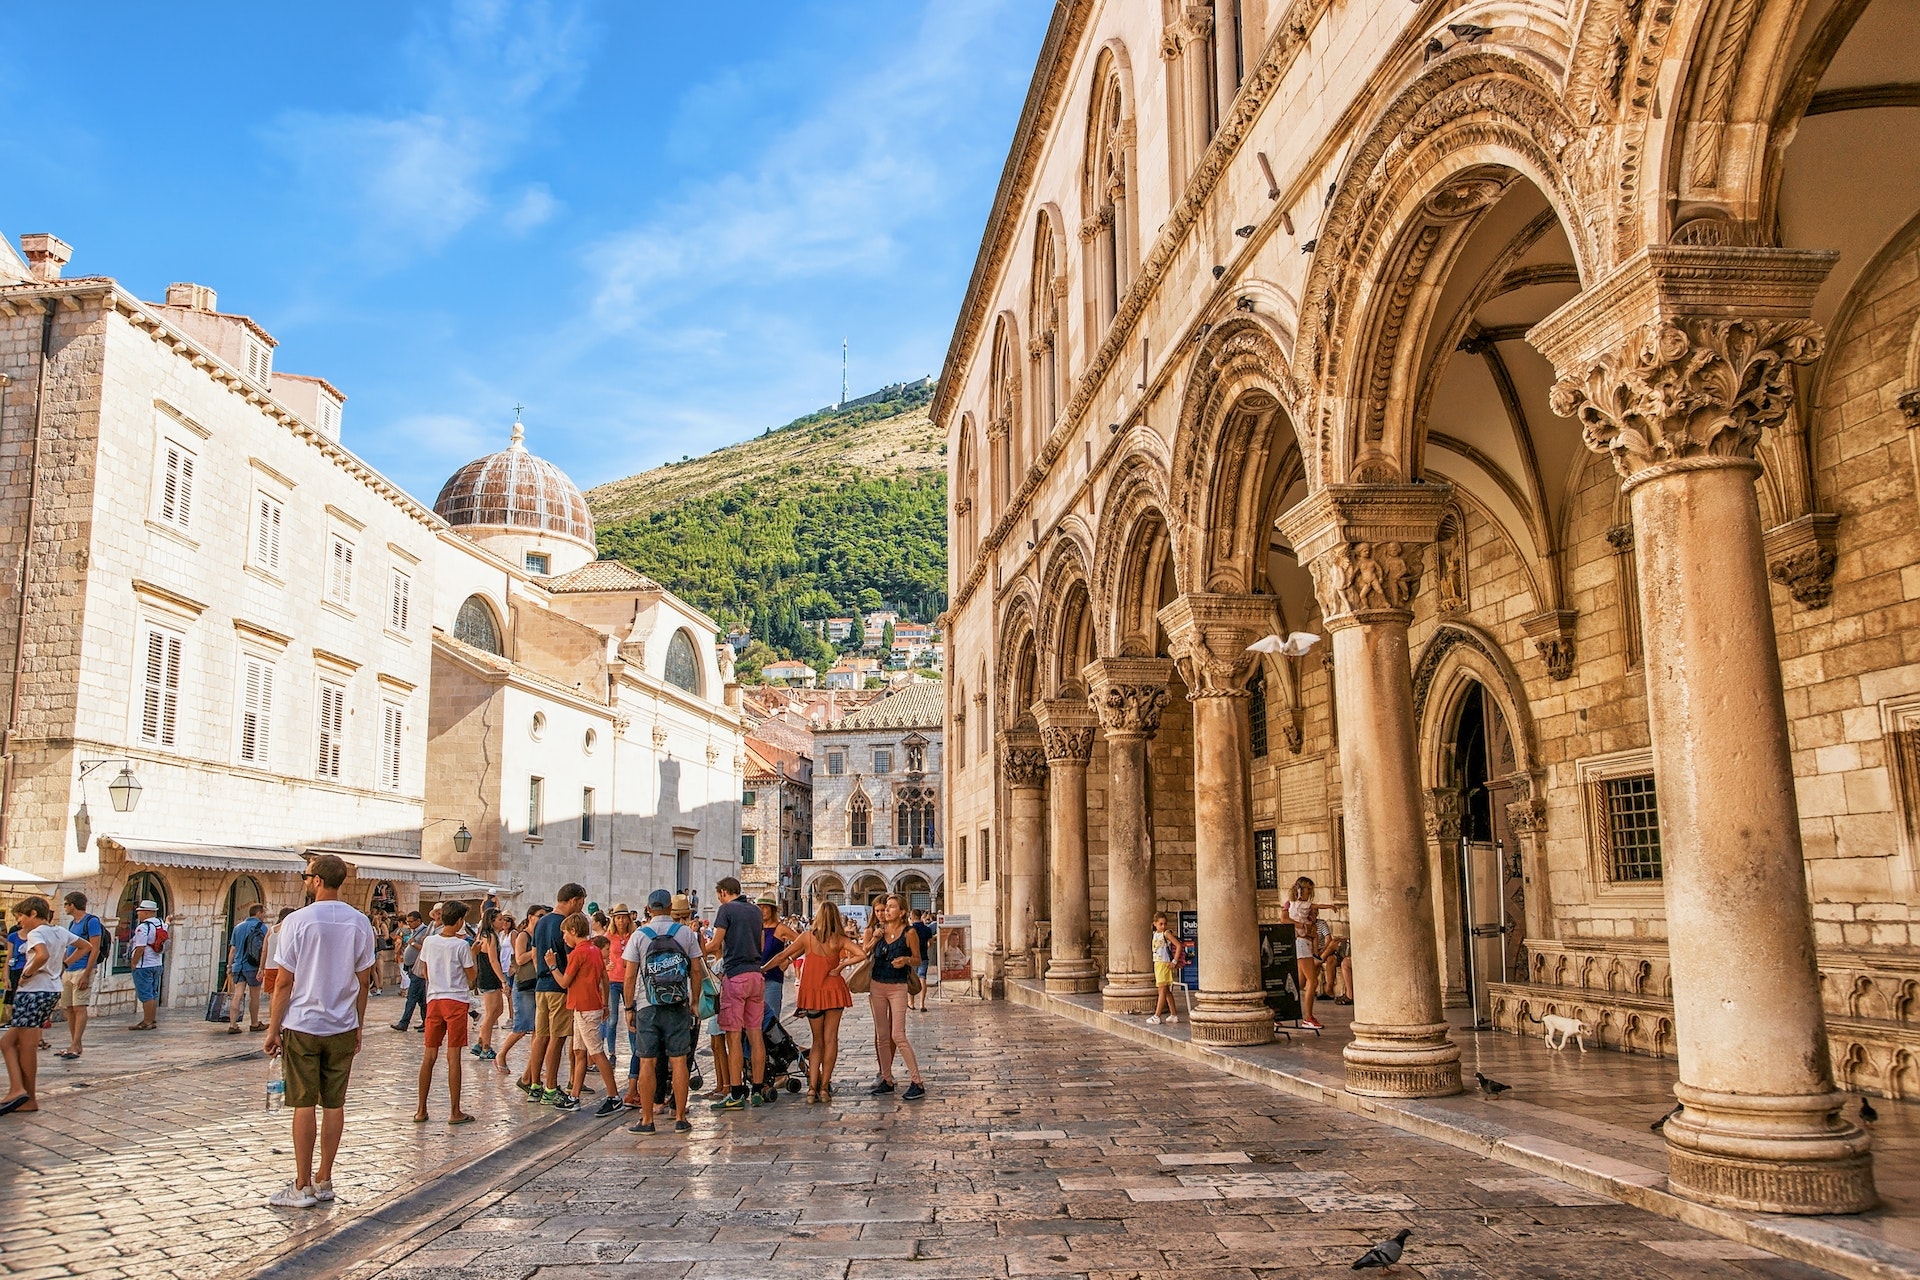  People at Rector Palace on Stradun Street in the Old city of Dubrovnik, Croatia.